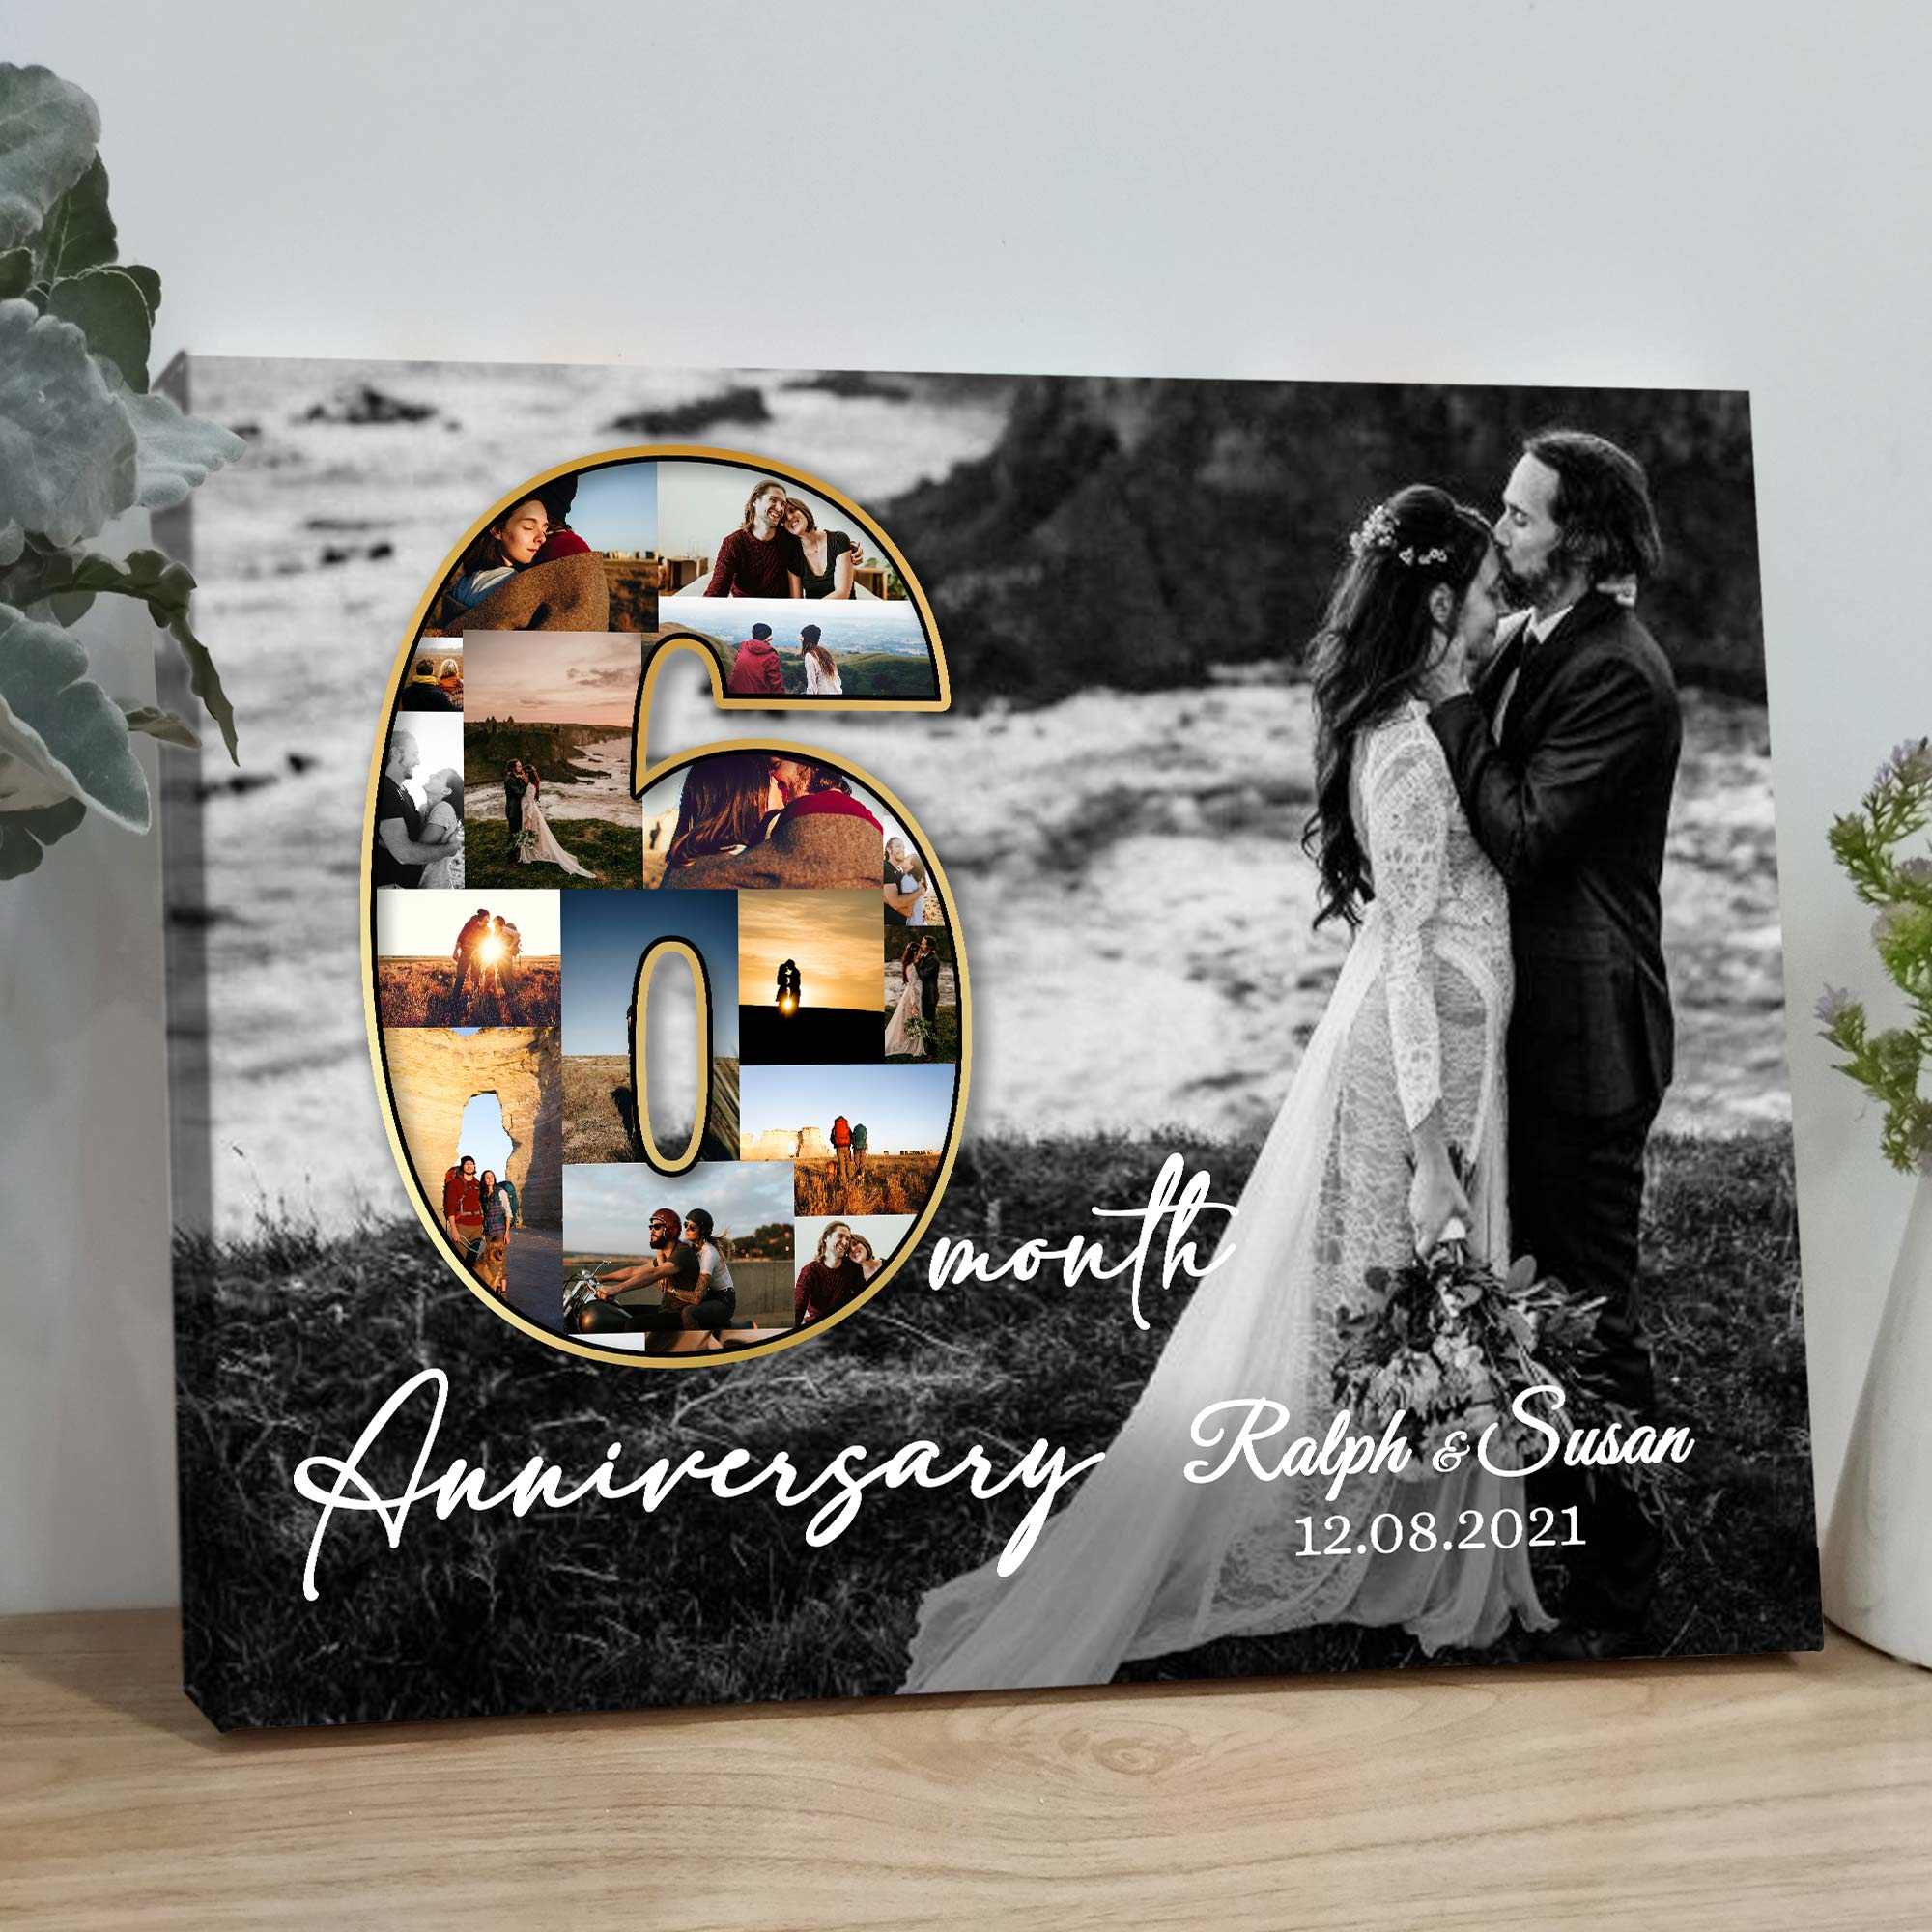 Personalized Valentine's Day Gifts for Him, 6 Month Anniversary Gift Ideas  for Her, Custom Number Photo Collage Canvas Wall Art - Magic Exhalation